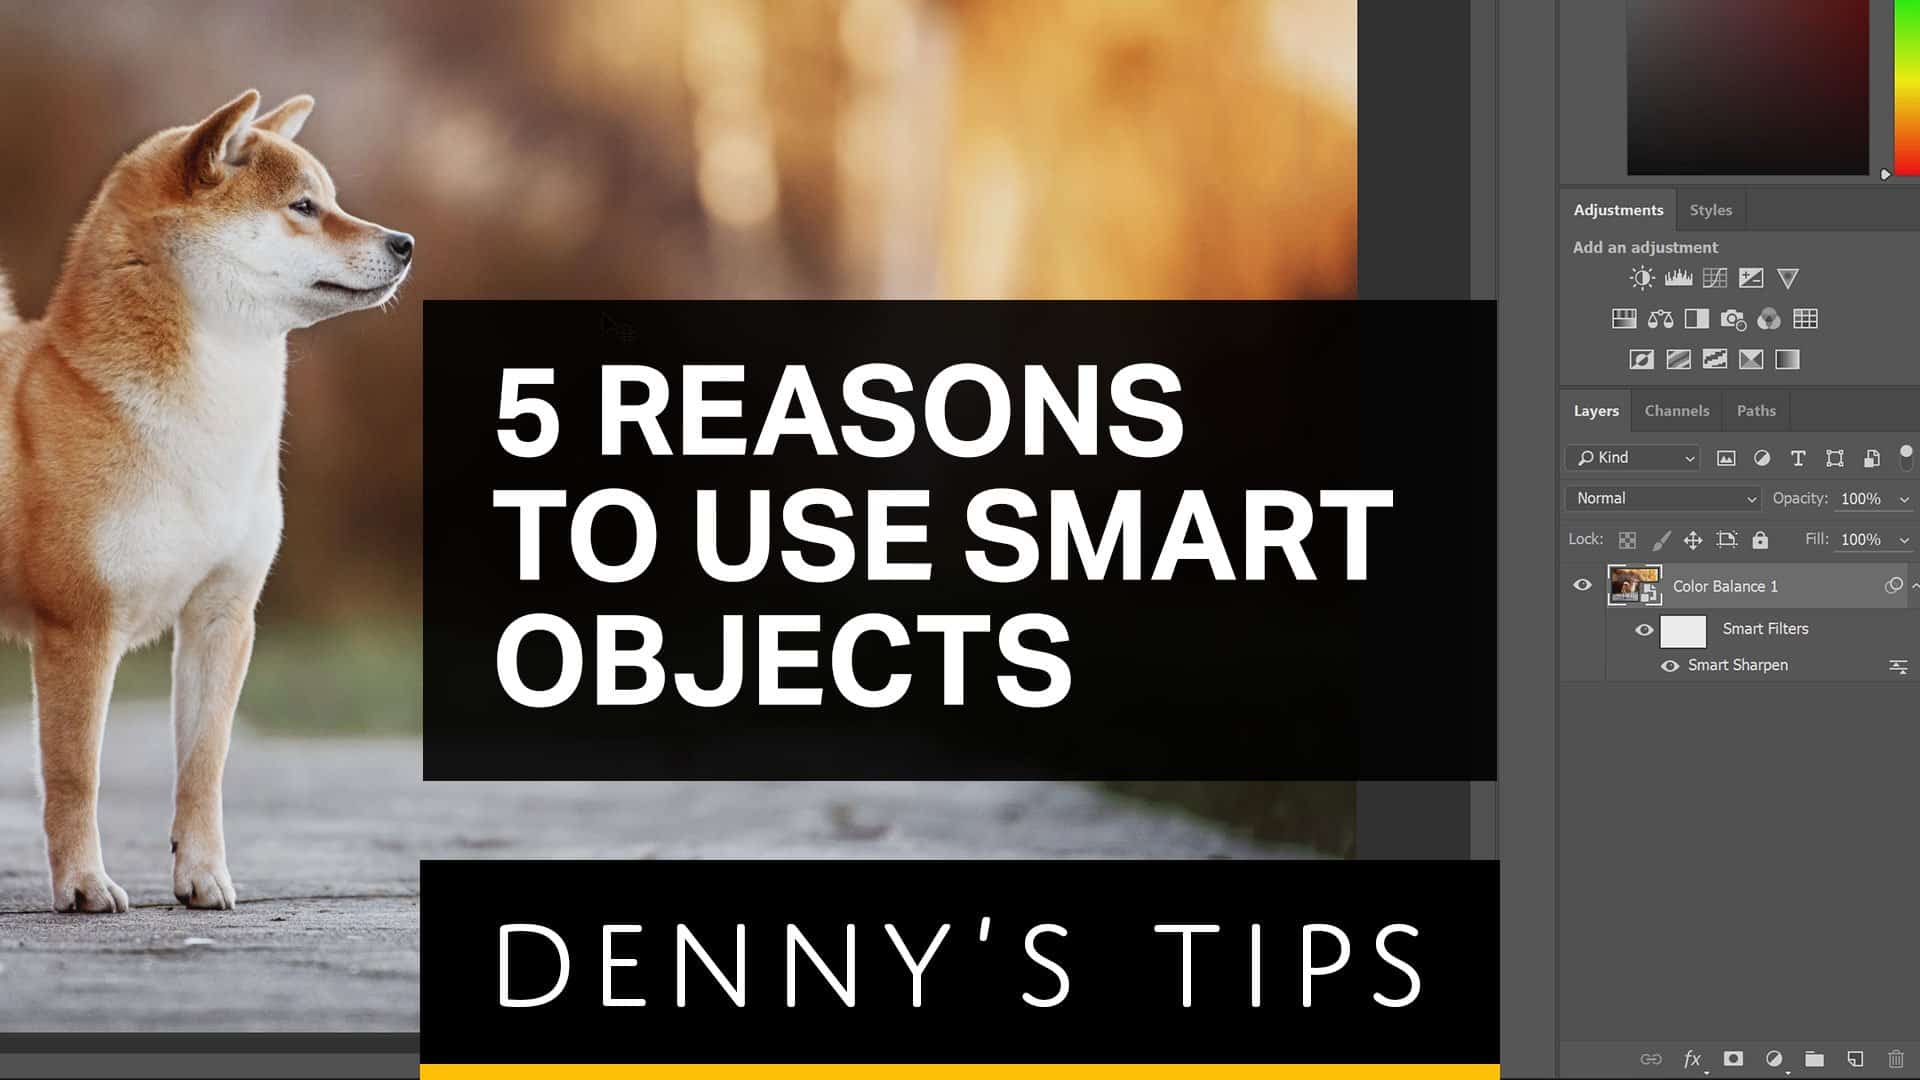 5 Reasons Why Smart Objects are AWESOME